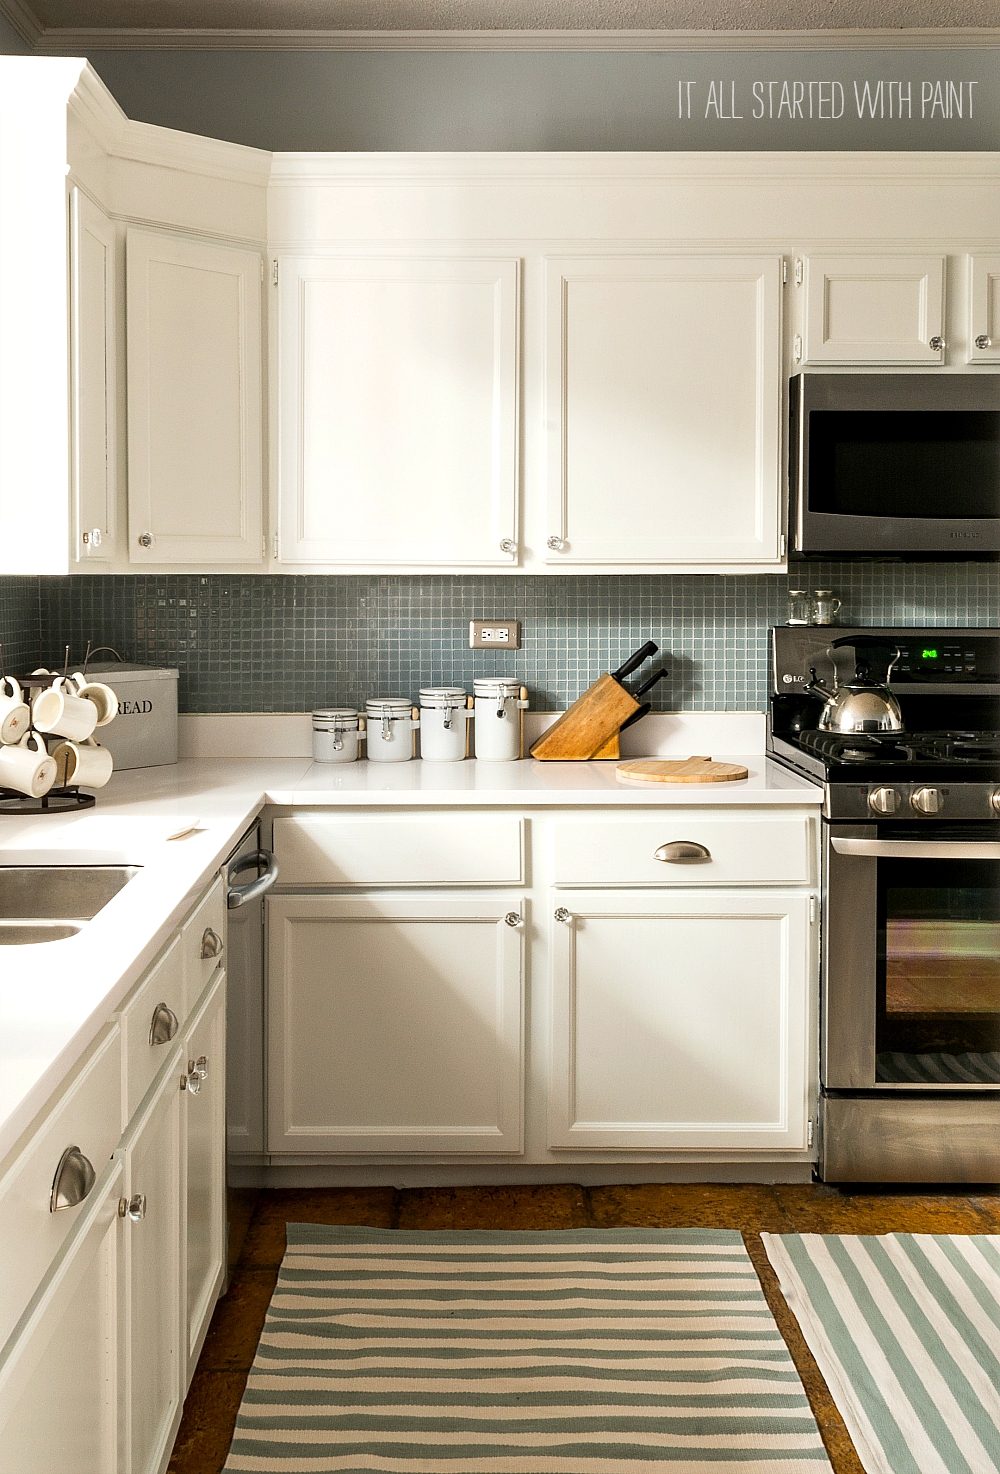 How To Impress Your 14-Year-Old Daughter: A Kitchen Before & After - It All  Started With Paint